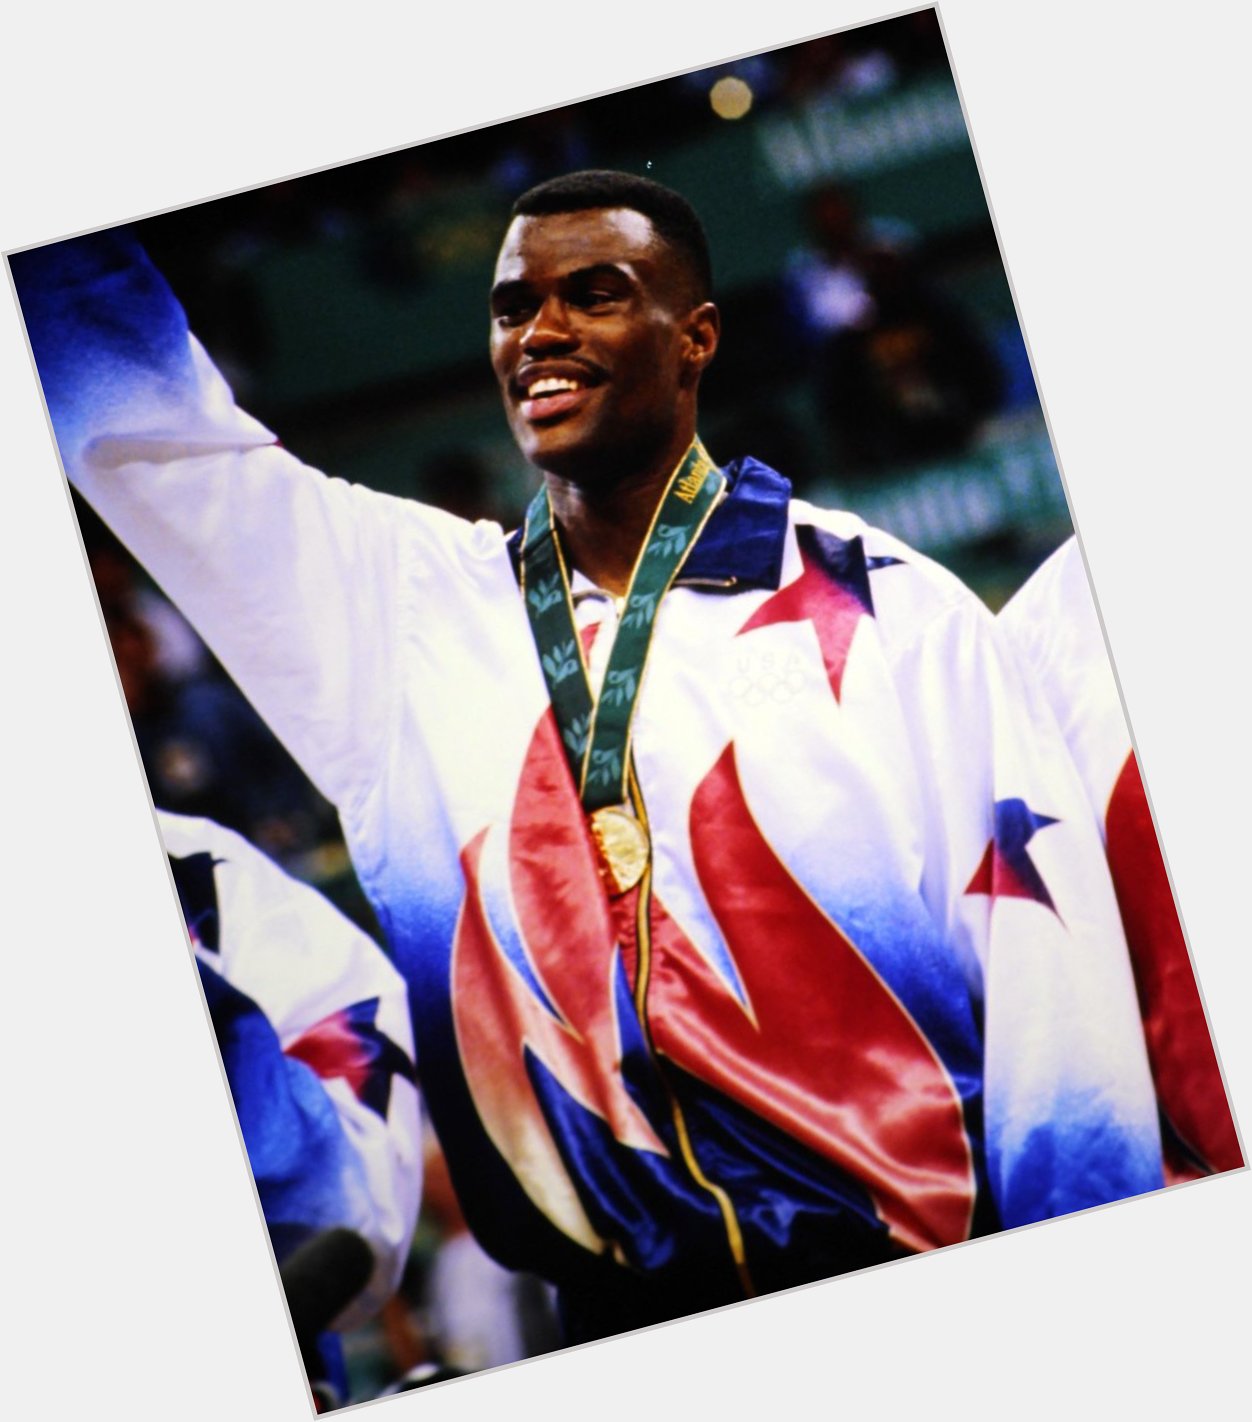 Three-time Olympic medalist   and World Cup winner David Robinson turns 5 7 today  Happy birthday, legend! 